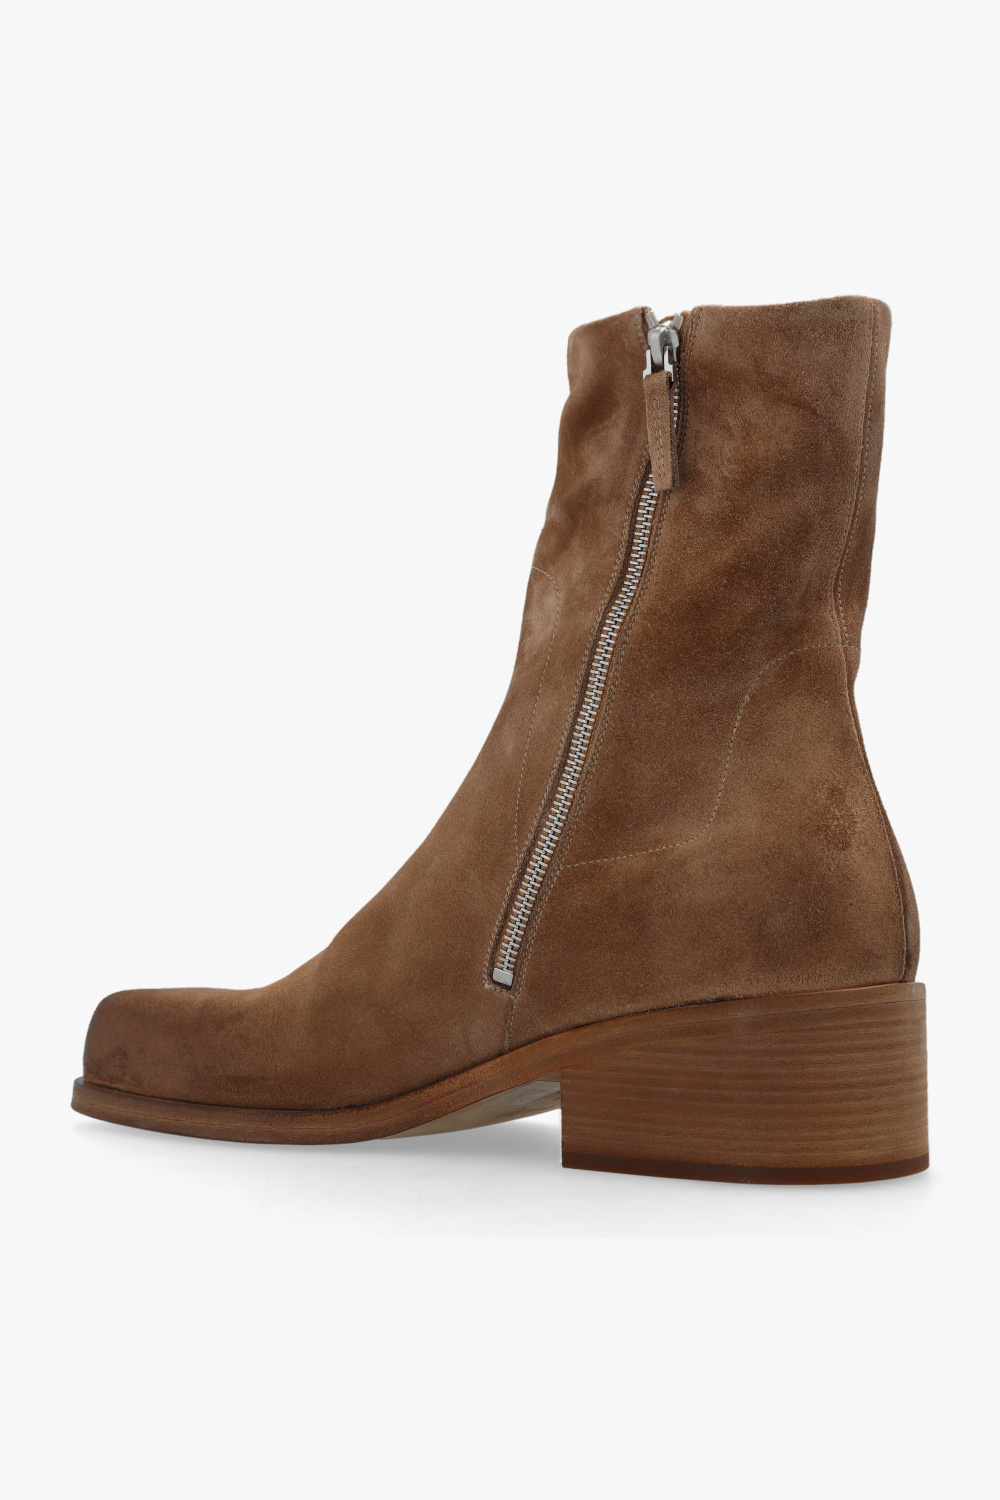 Marsell ‘Cassello’ heeled ankle boots in suede